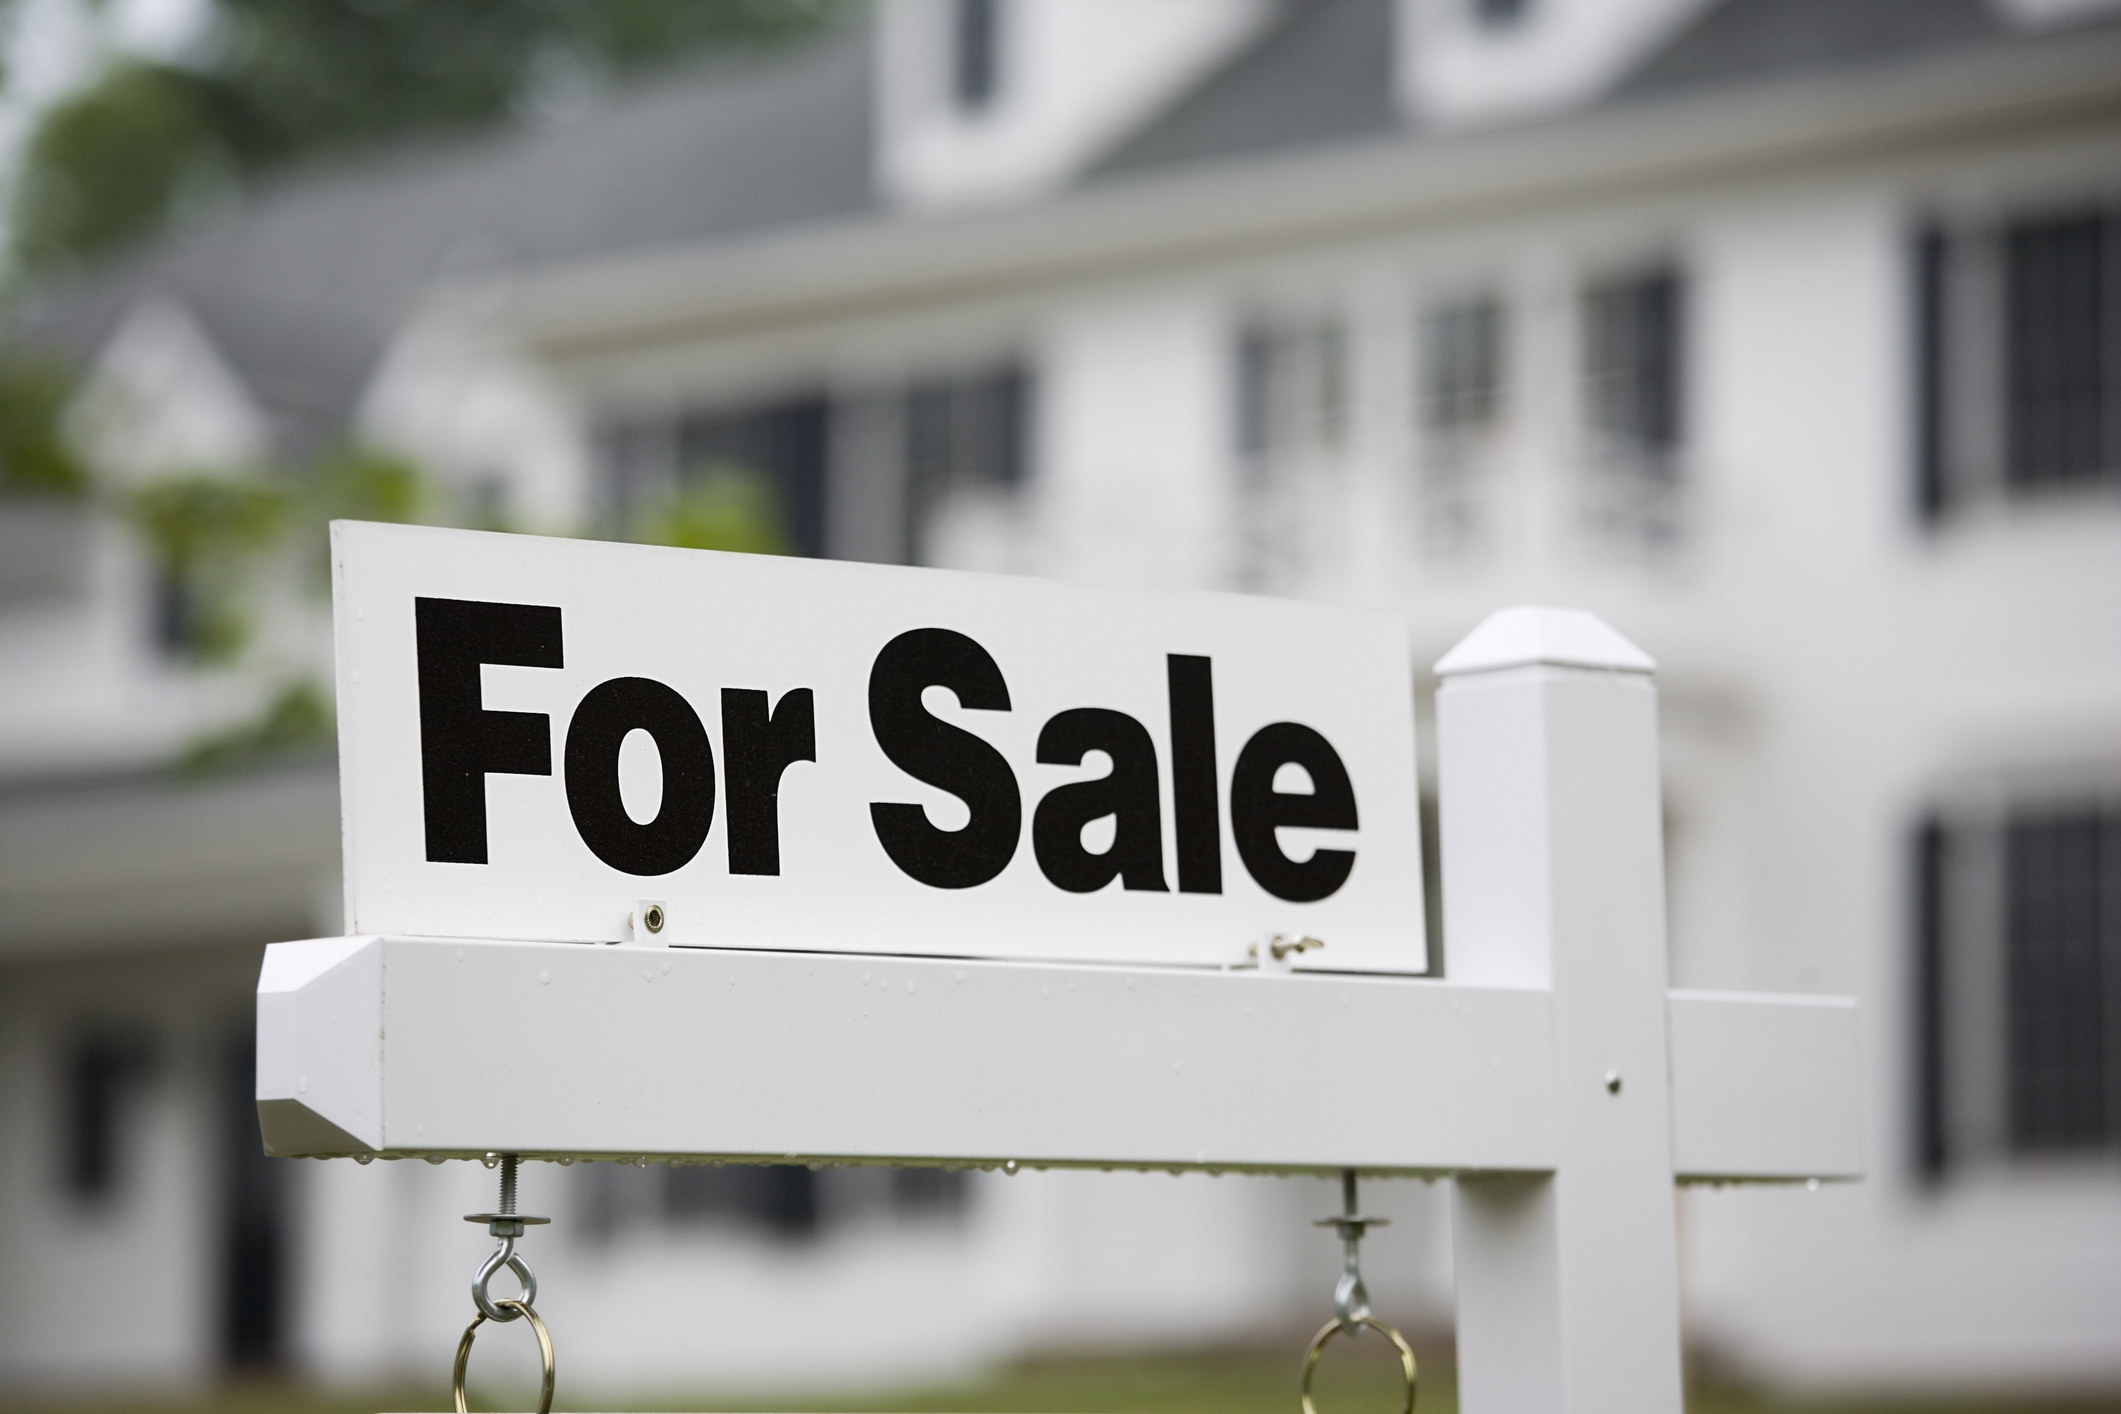 A &quot;For Sale&quot; sign in front of a large house